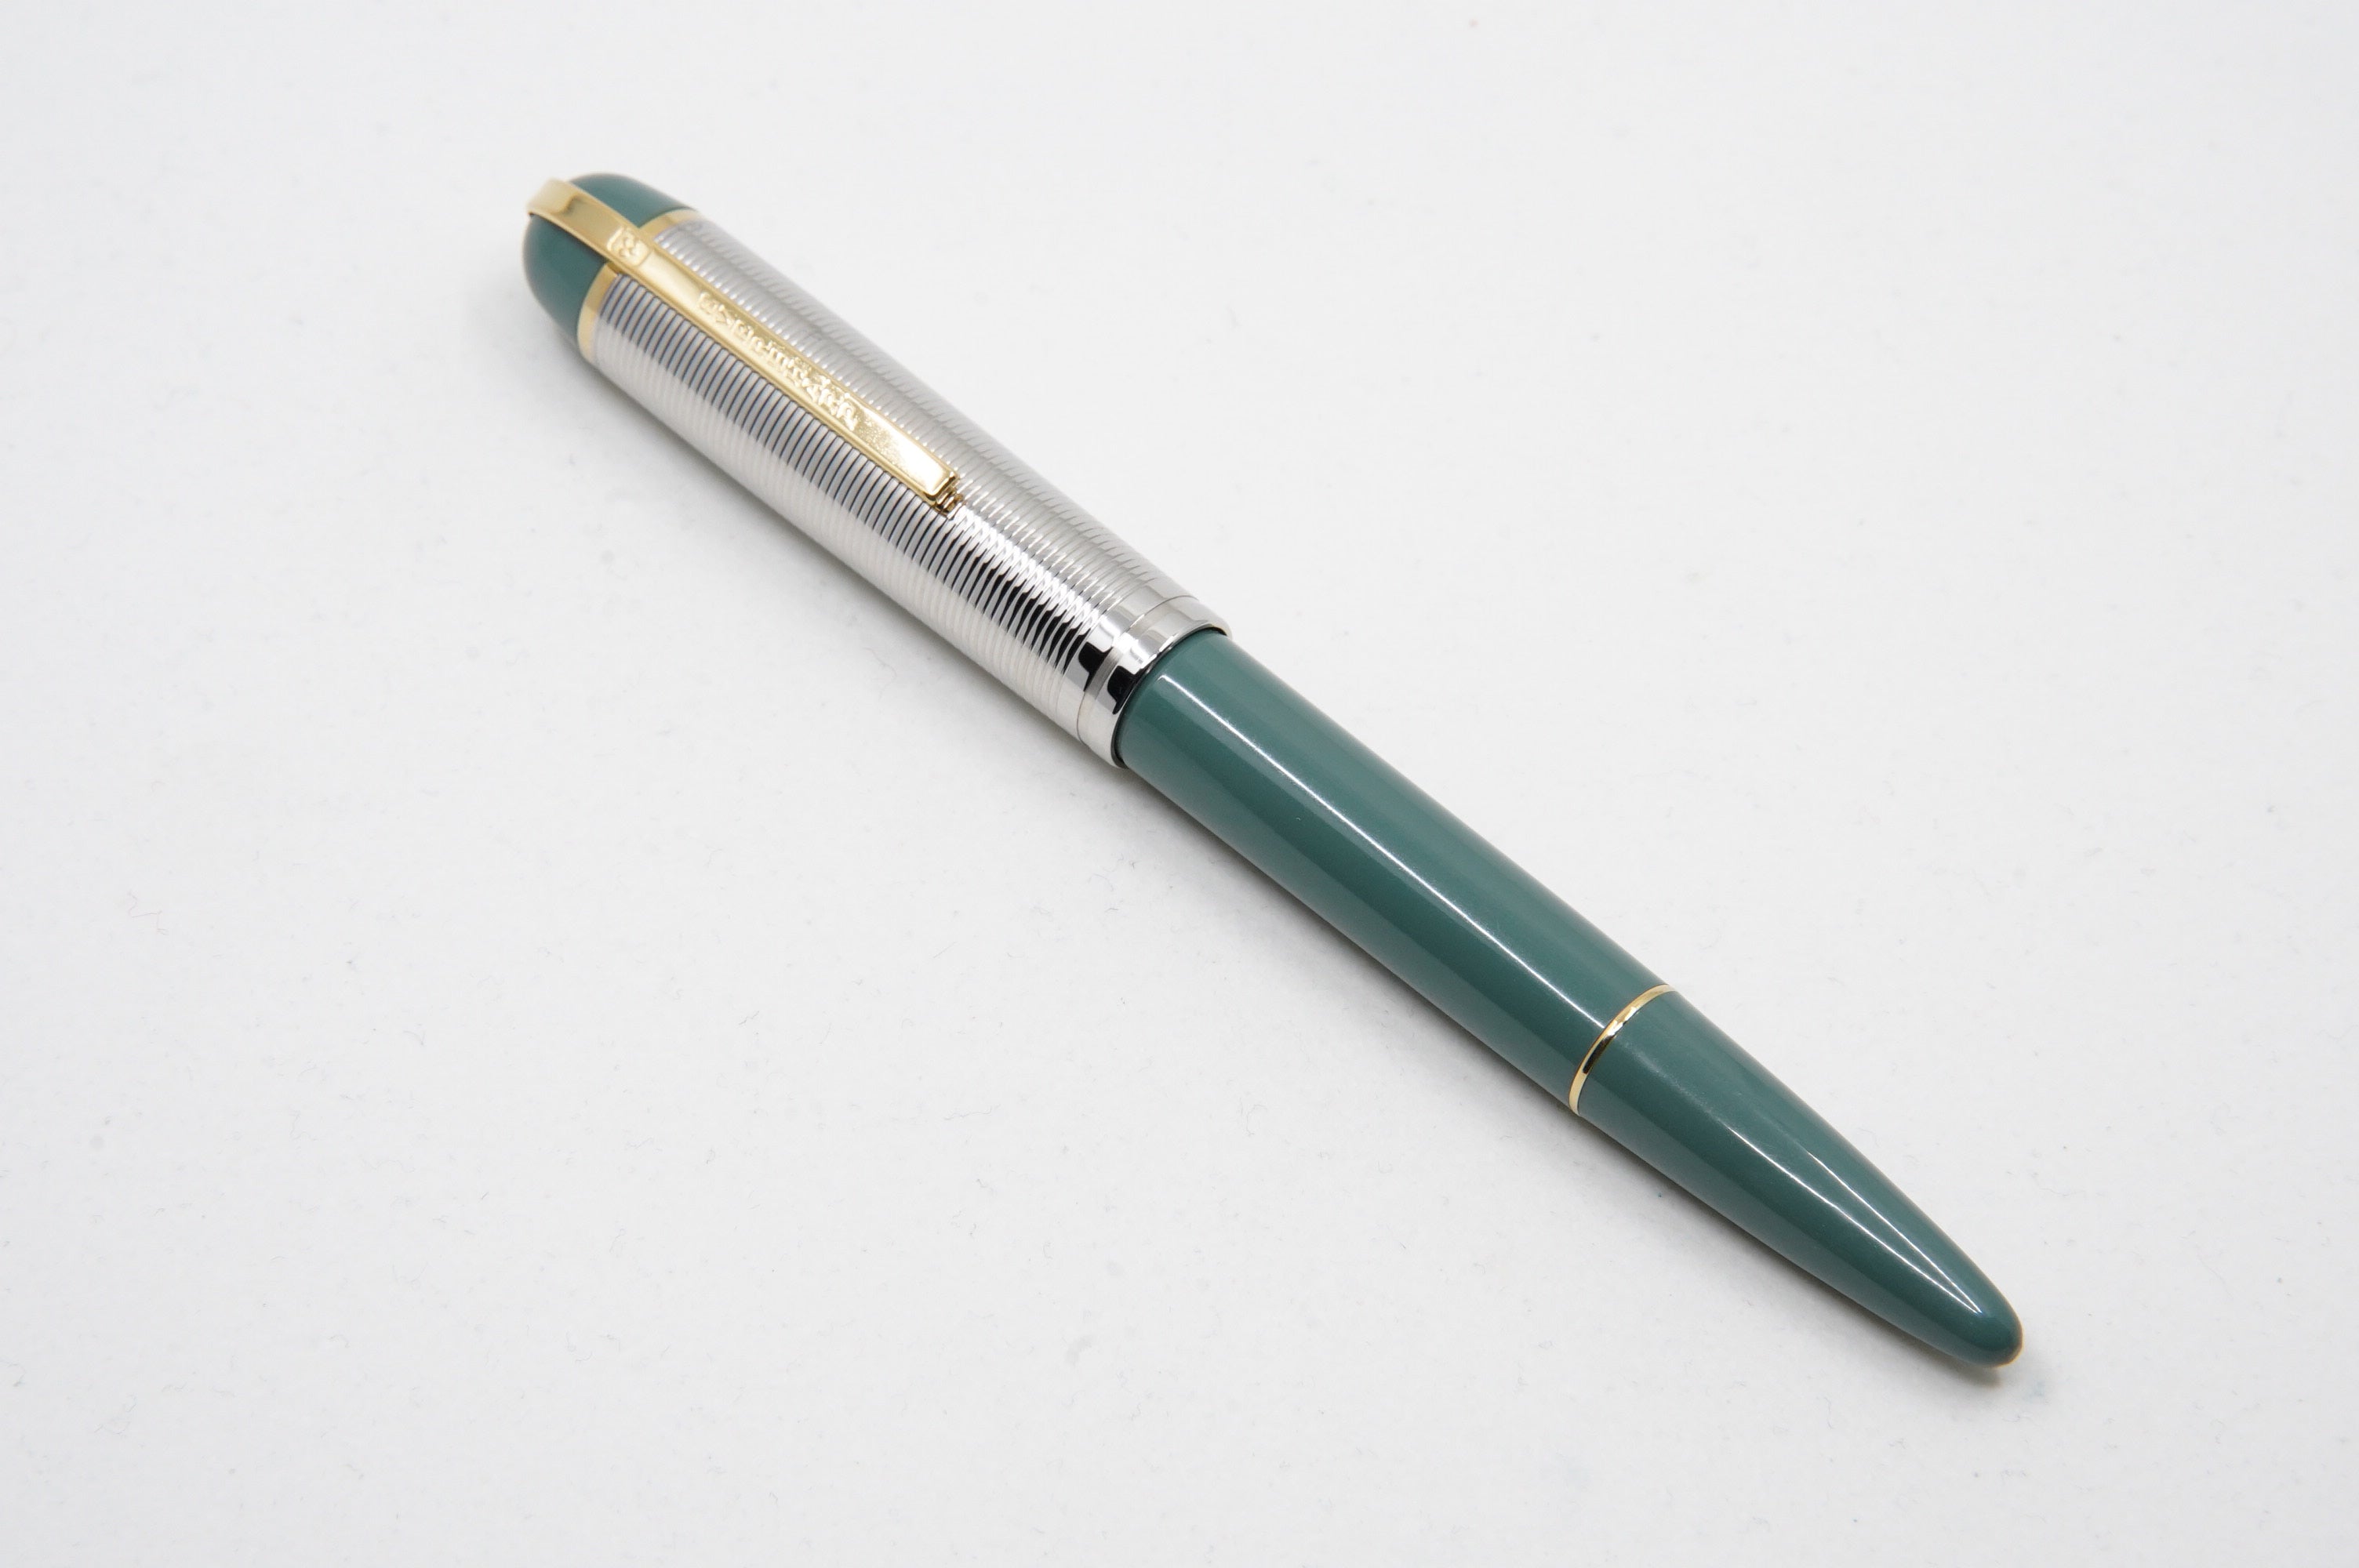 Wahl Eversharp Skyline FP Grey Elephant - The iconic SKYLINE created by Henry Dreyfus in 1939